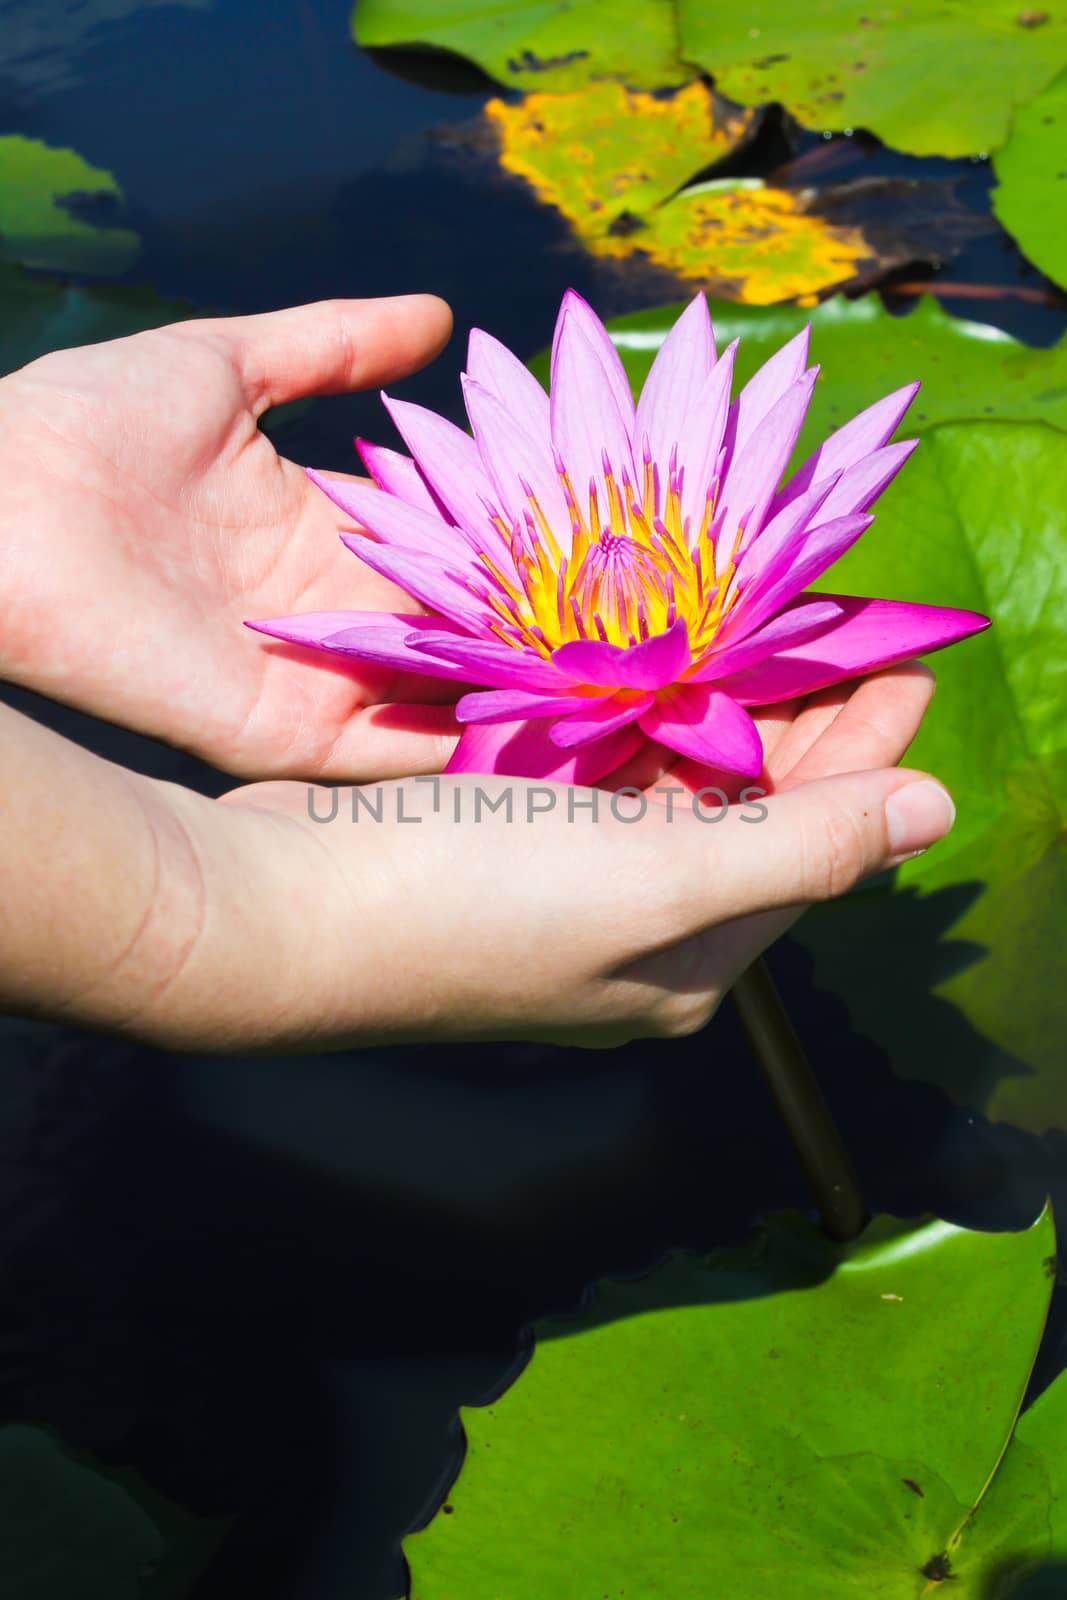 Lotus, symbol of peace, in hands means the people like peace.